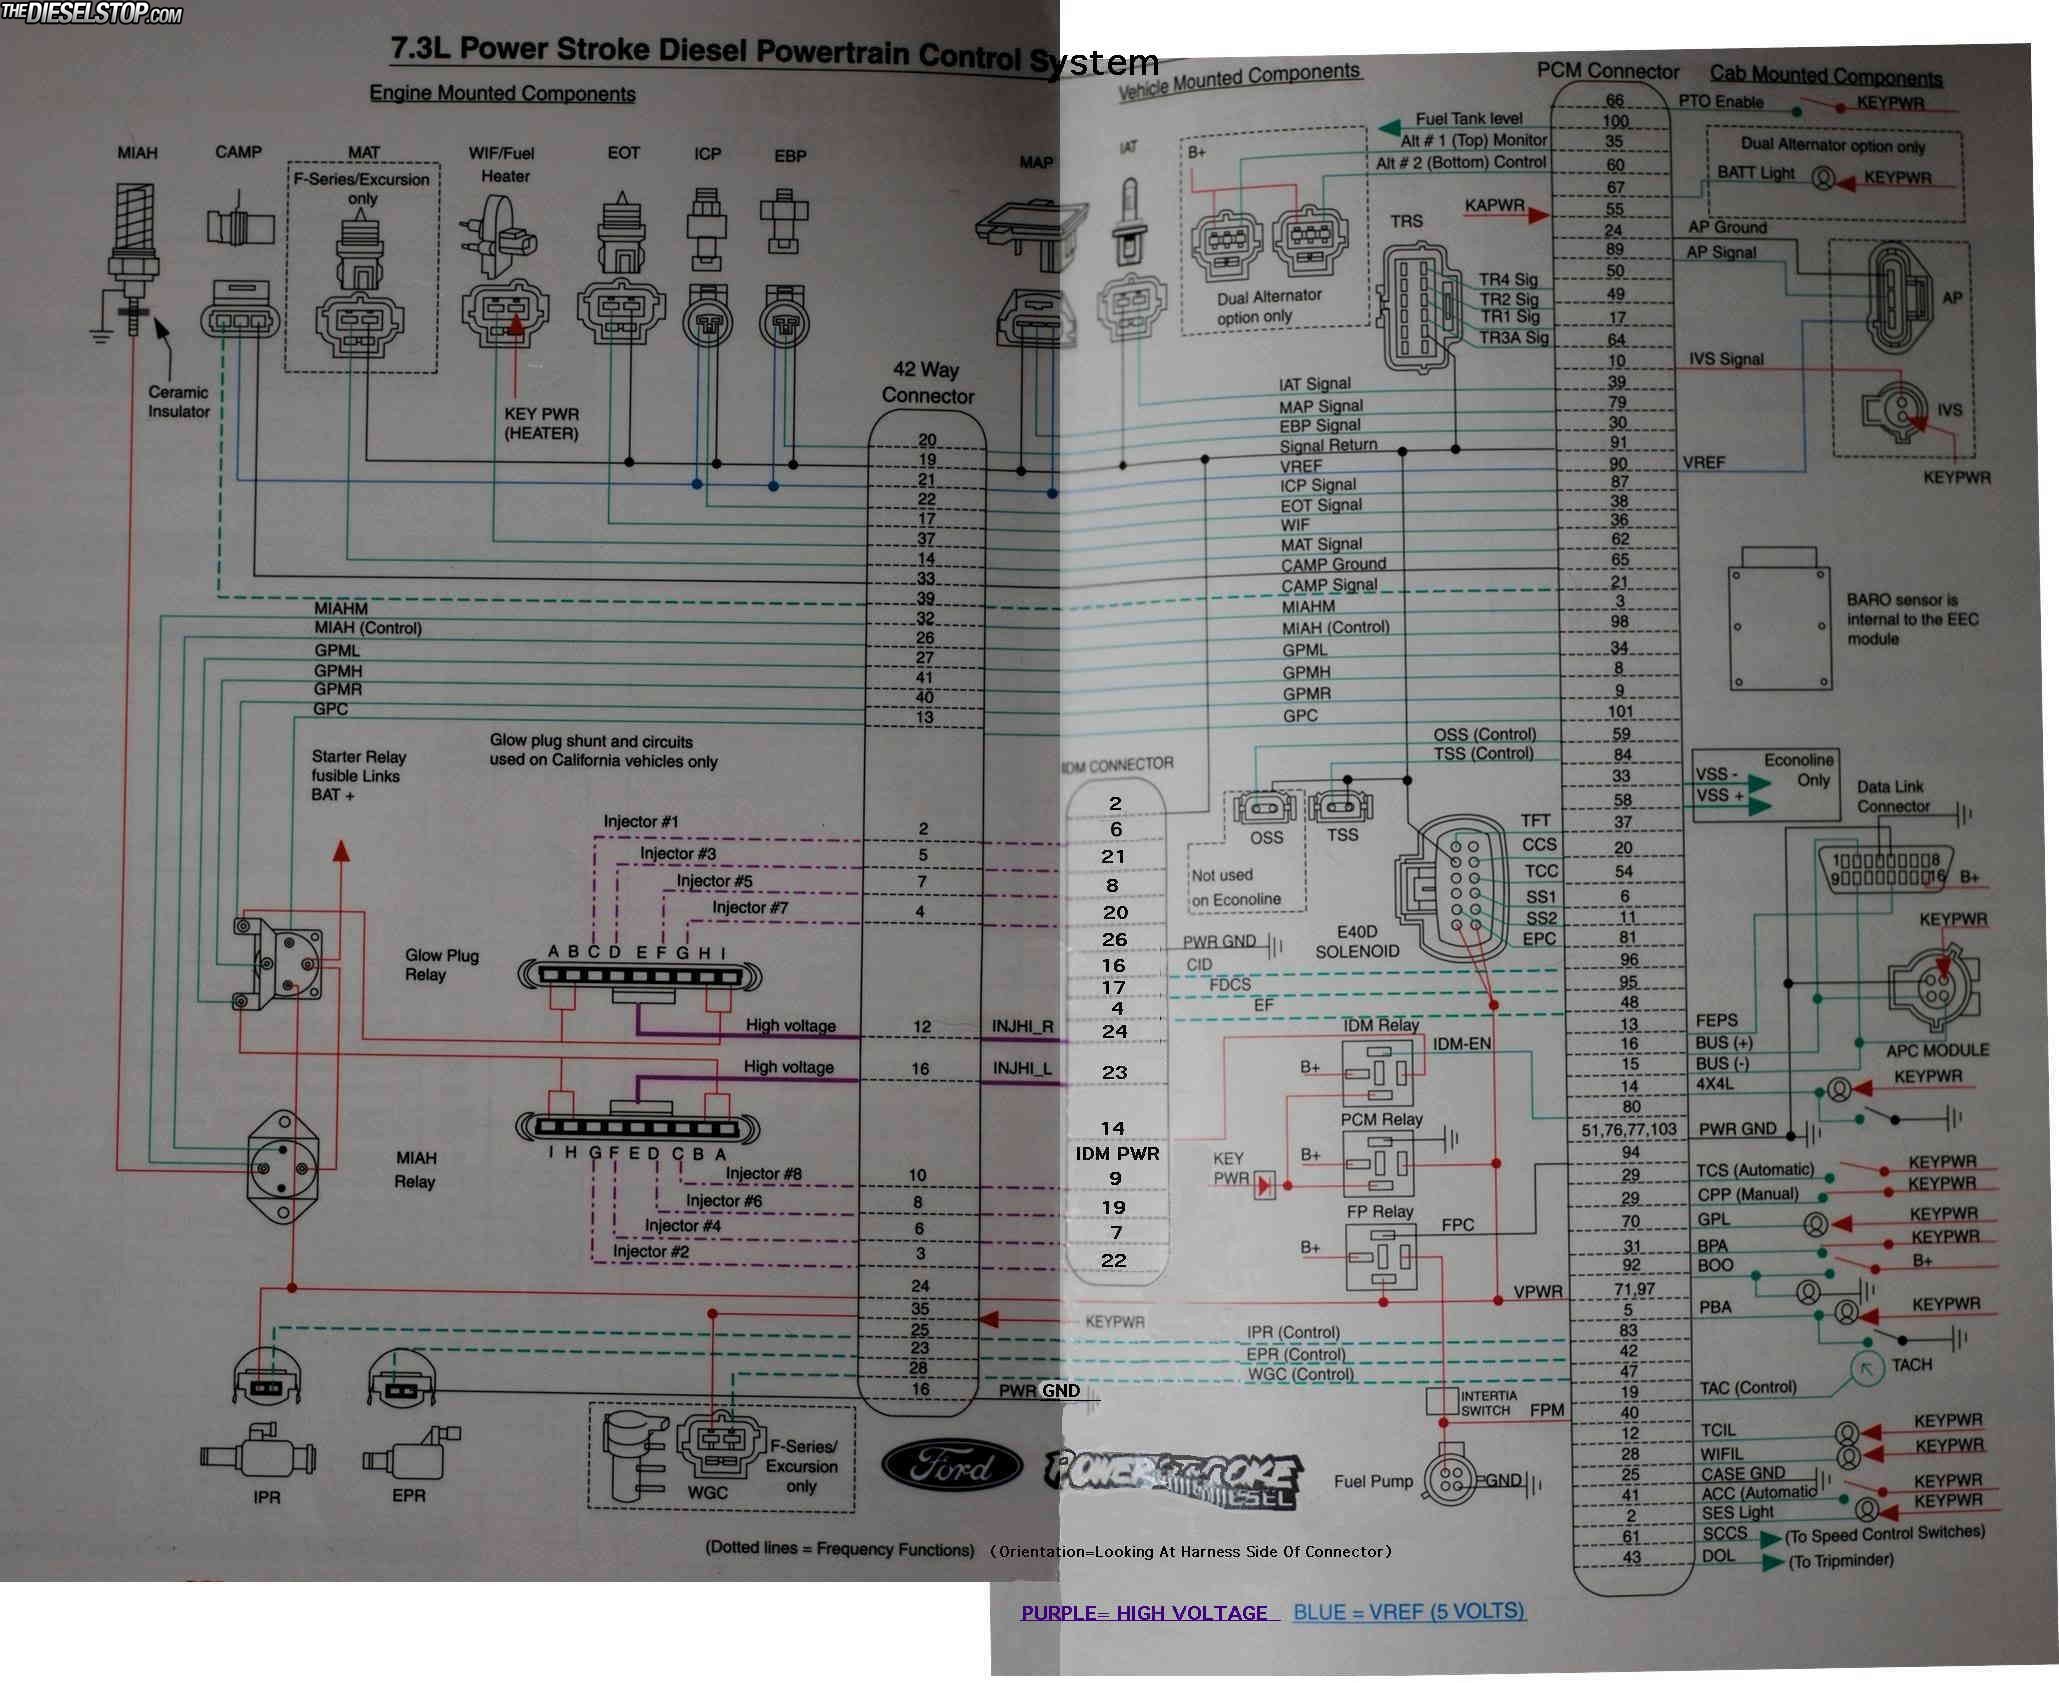 it s very detailed and shows how every wire for each ponent routes to the PCM